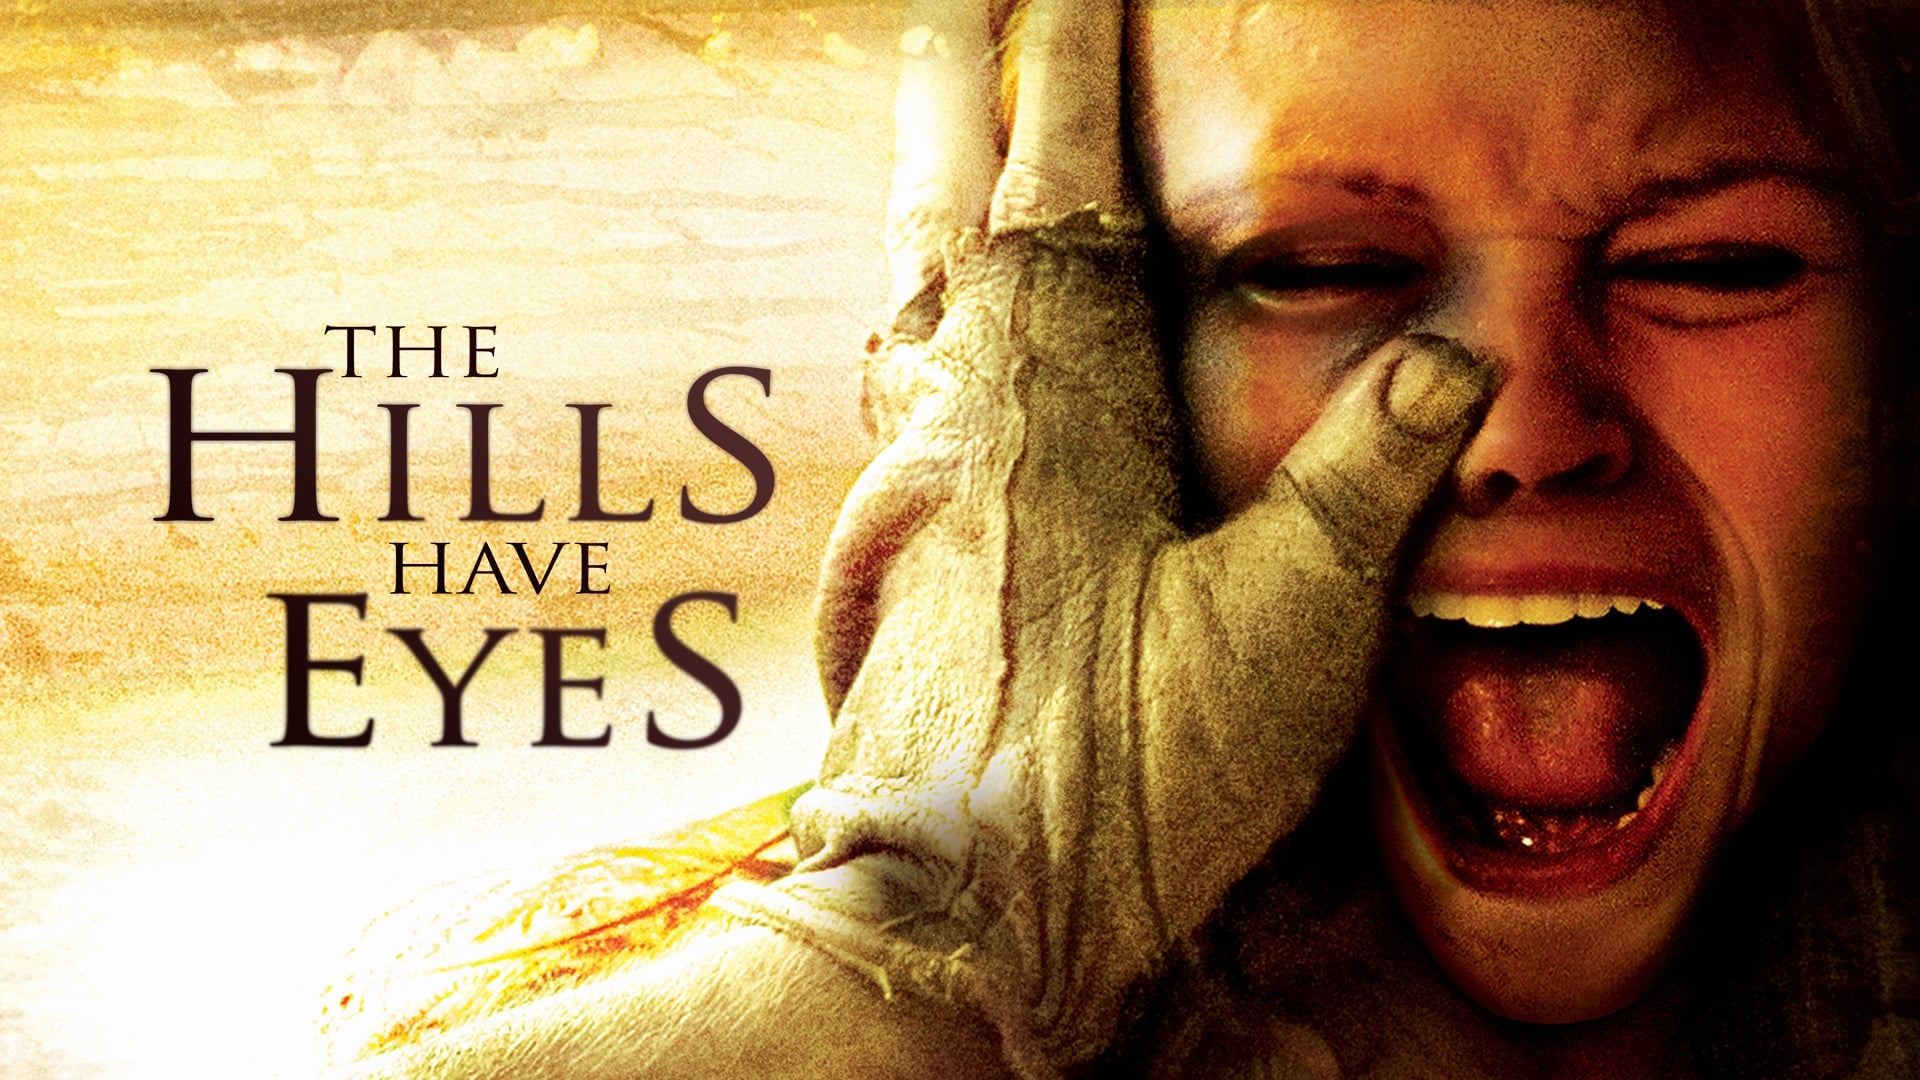 Is The Hills Have Eyes A True Story? What Happened to The Family in The Hills Have Eyes?